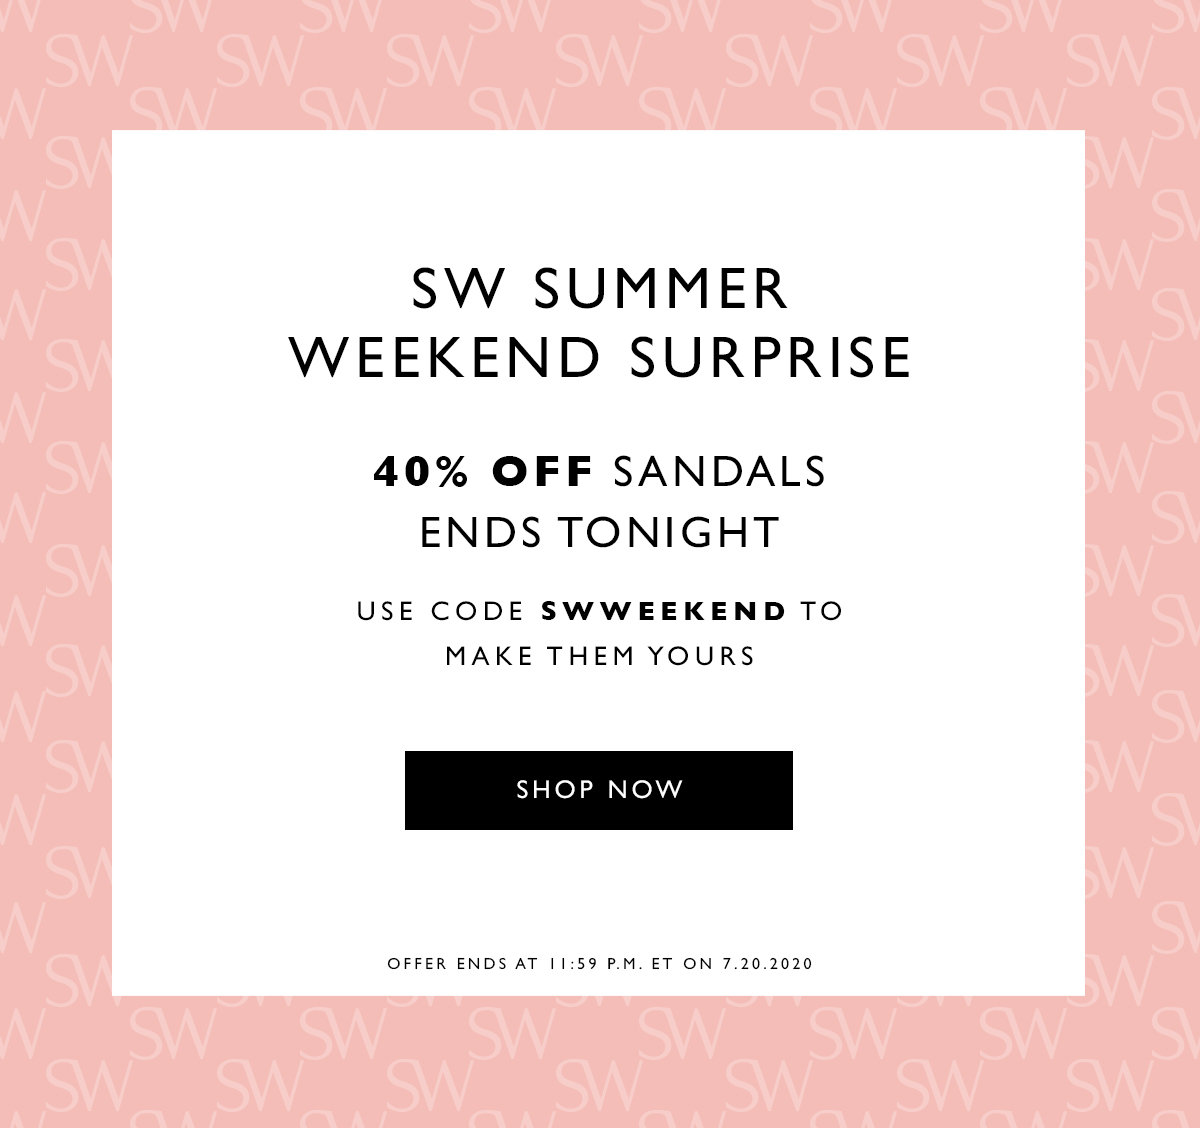 SW Summer Weekend Surprise 
40% off sandals ends tonight. Use code SWWEEKEND to make them yours. SHOP NOW. Offer ends at 11:59 P.M. ET on 7.20.2020